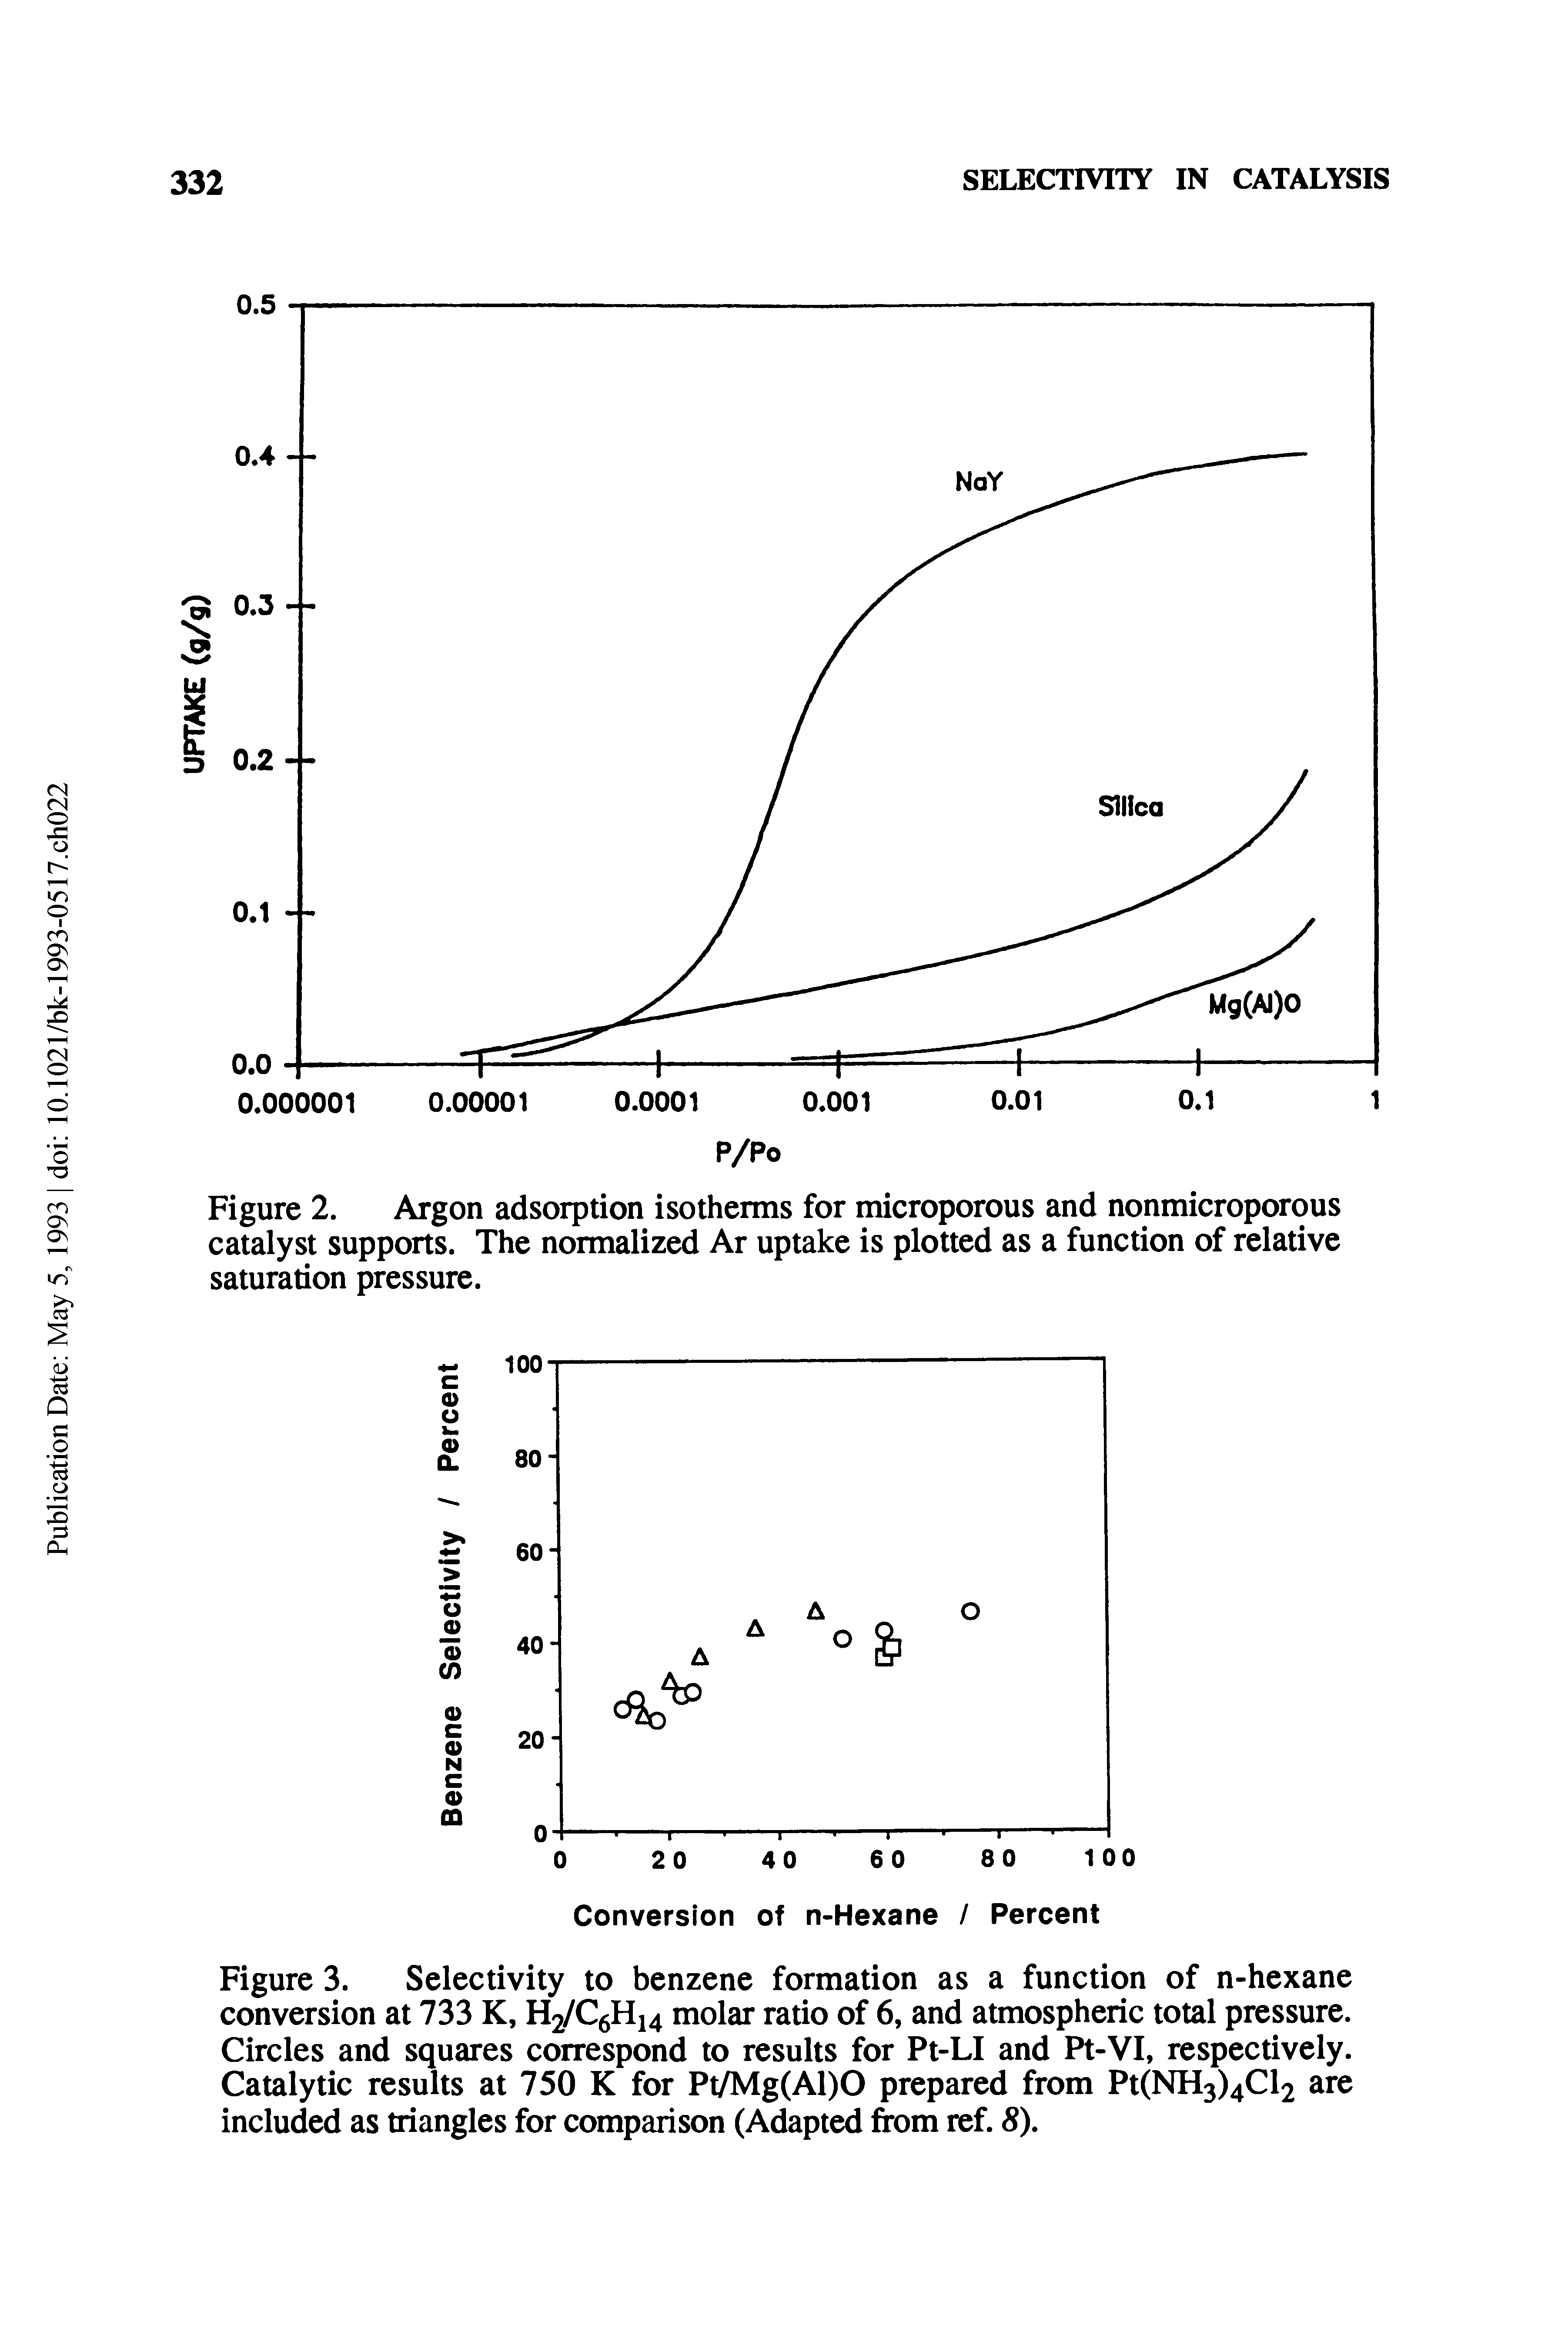 Figure 3. Selectivity to benzene formation as a function of n-hexane conversion at 733 K, H2/C6H14 molar ratio of 6, and atmospheric total pressure. Circles and squares correspond to results for Pt-LI and Pt-VI, respectively. Catalytic results at 750 K for Pt/Mg(Al)0 prepared from Pt(NH3)4Cl2 are included as triangles for comparison (Adapted from ref. 8).